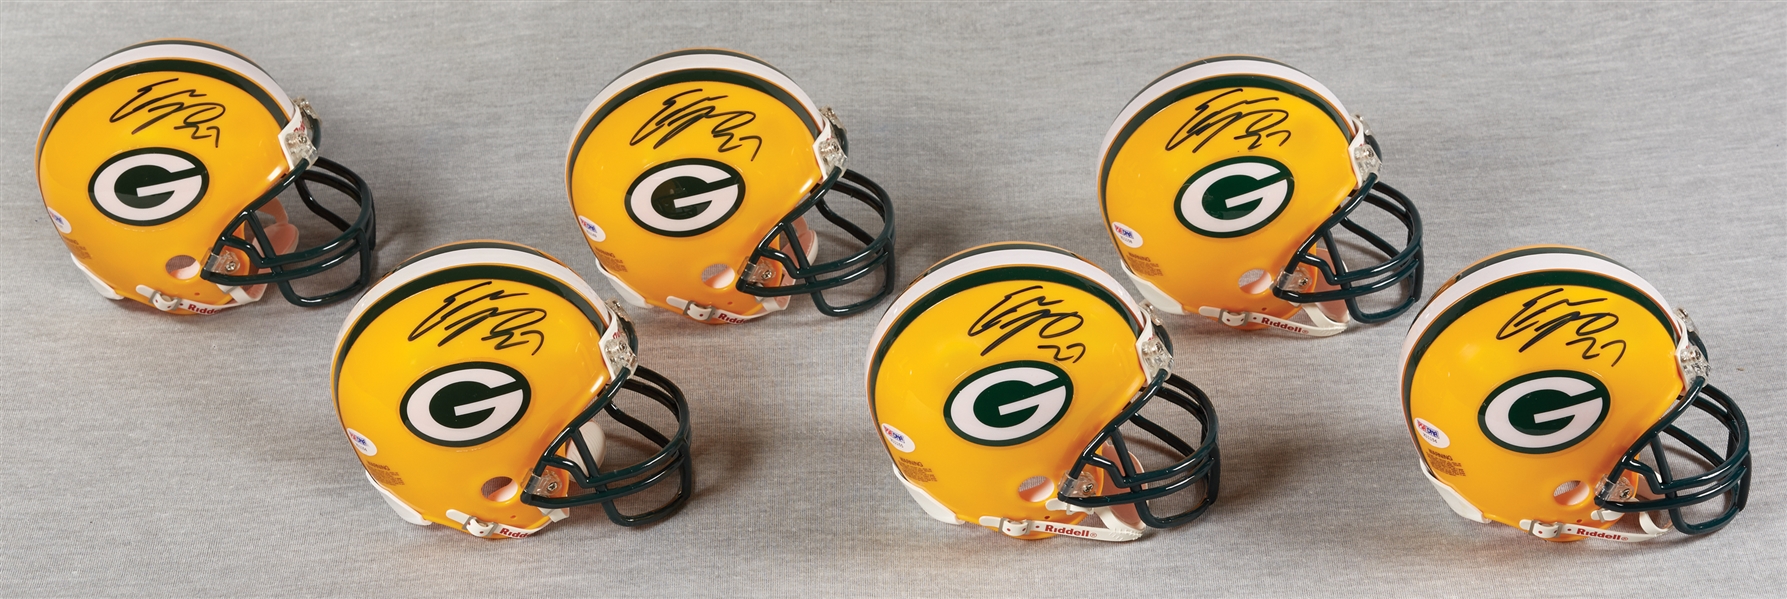 Eddie Lacy Signed Packers Mini-Helmets Case (PSA/DNA) (6)